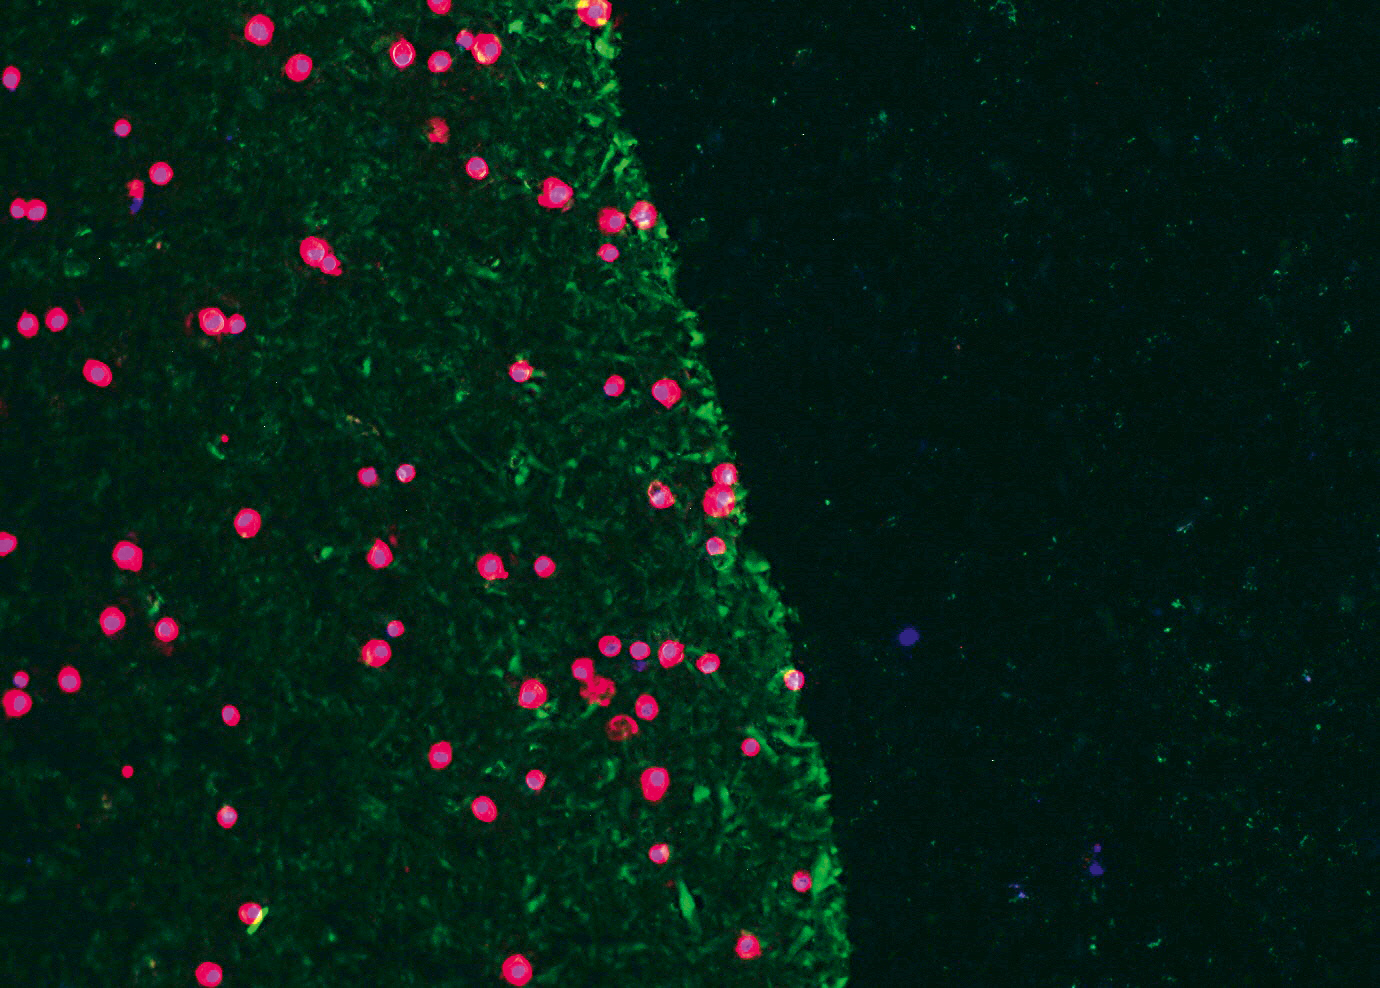 Early stem cell (red) adhesion on albumin coating (green) after one minute.